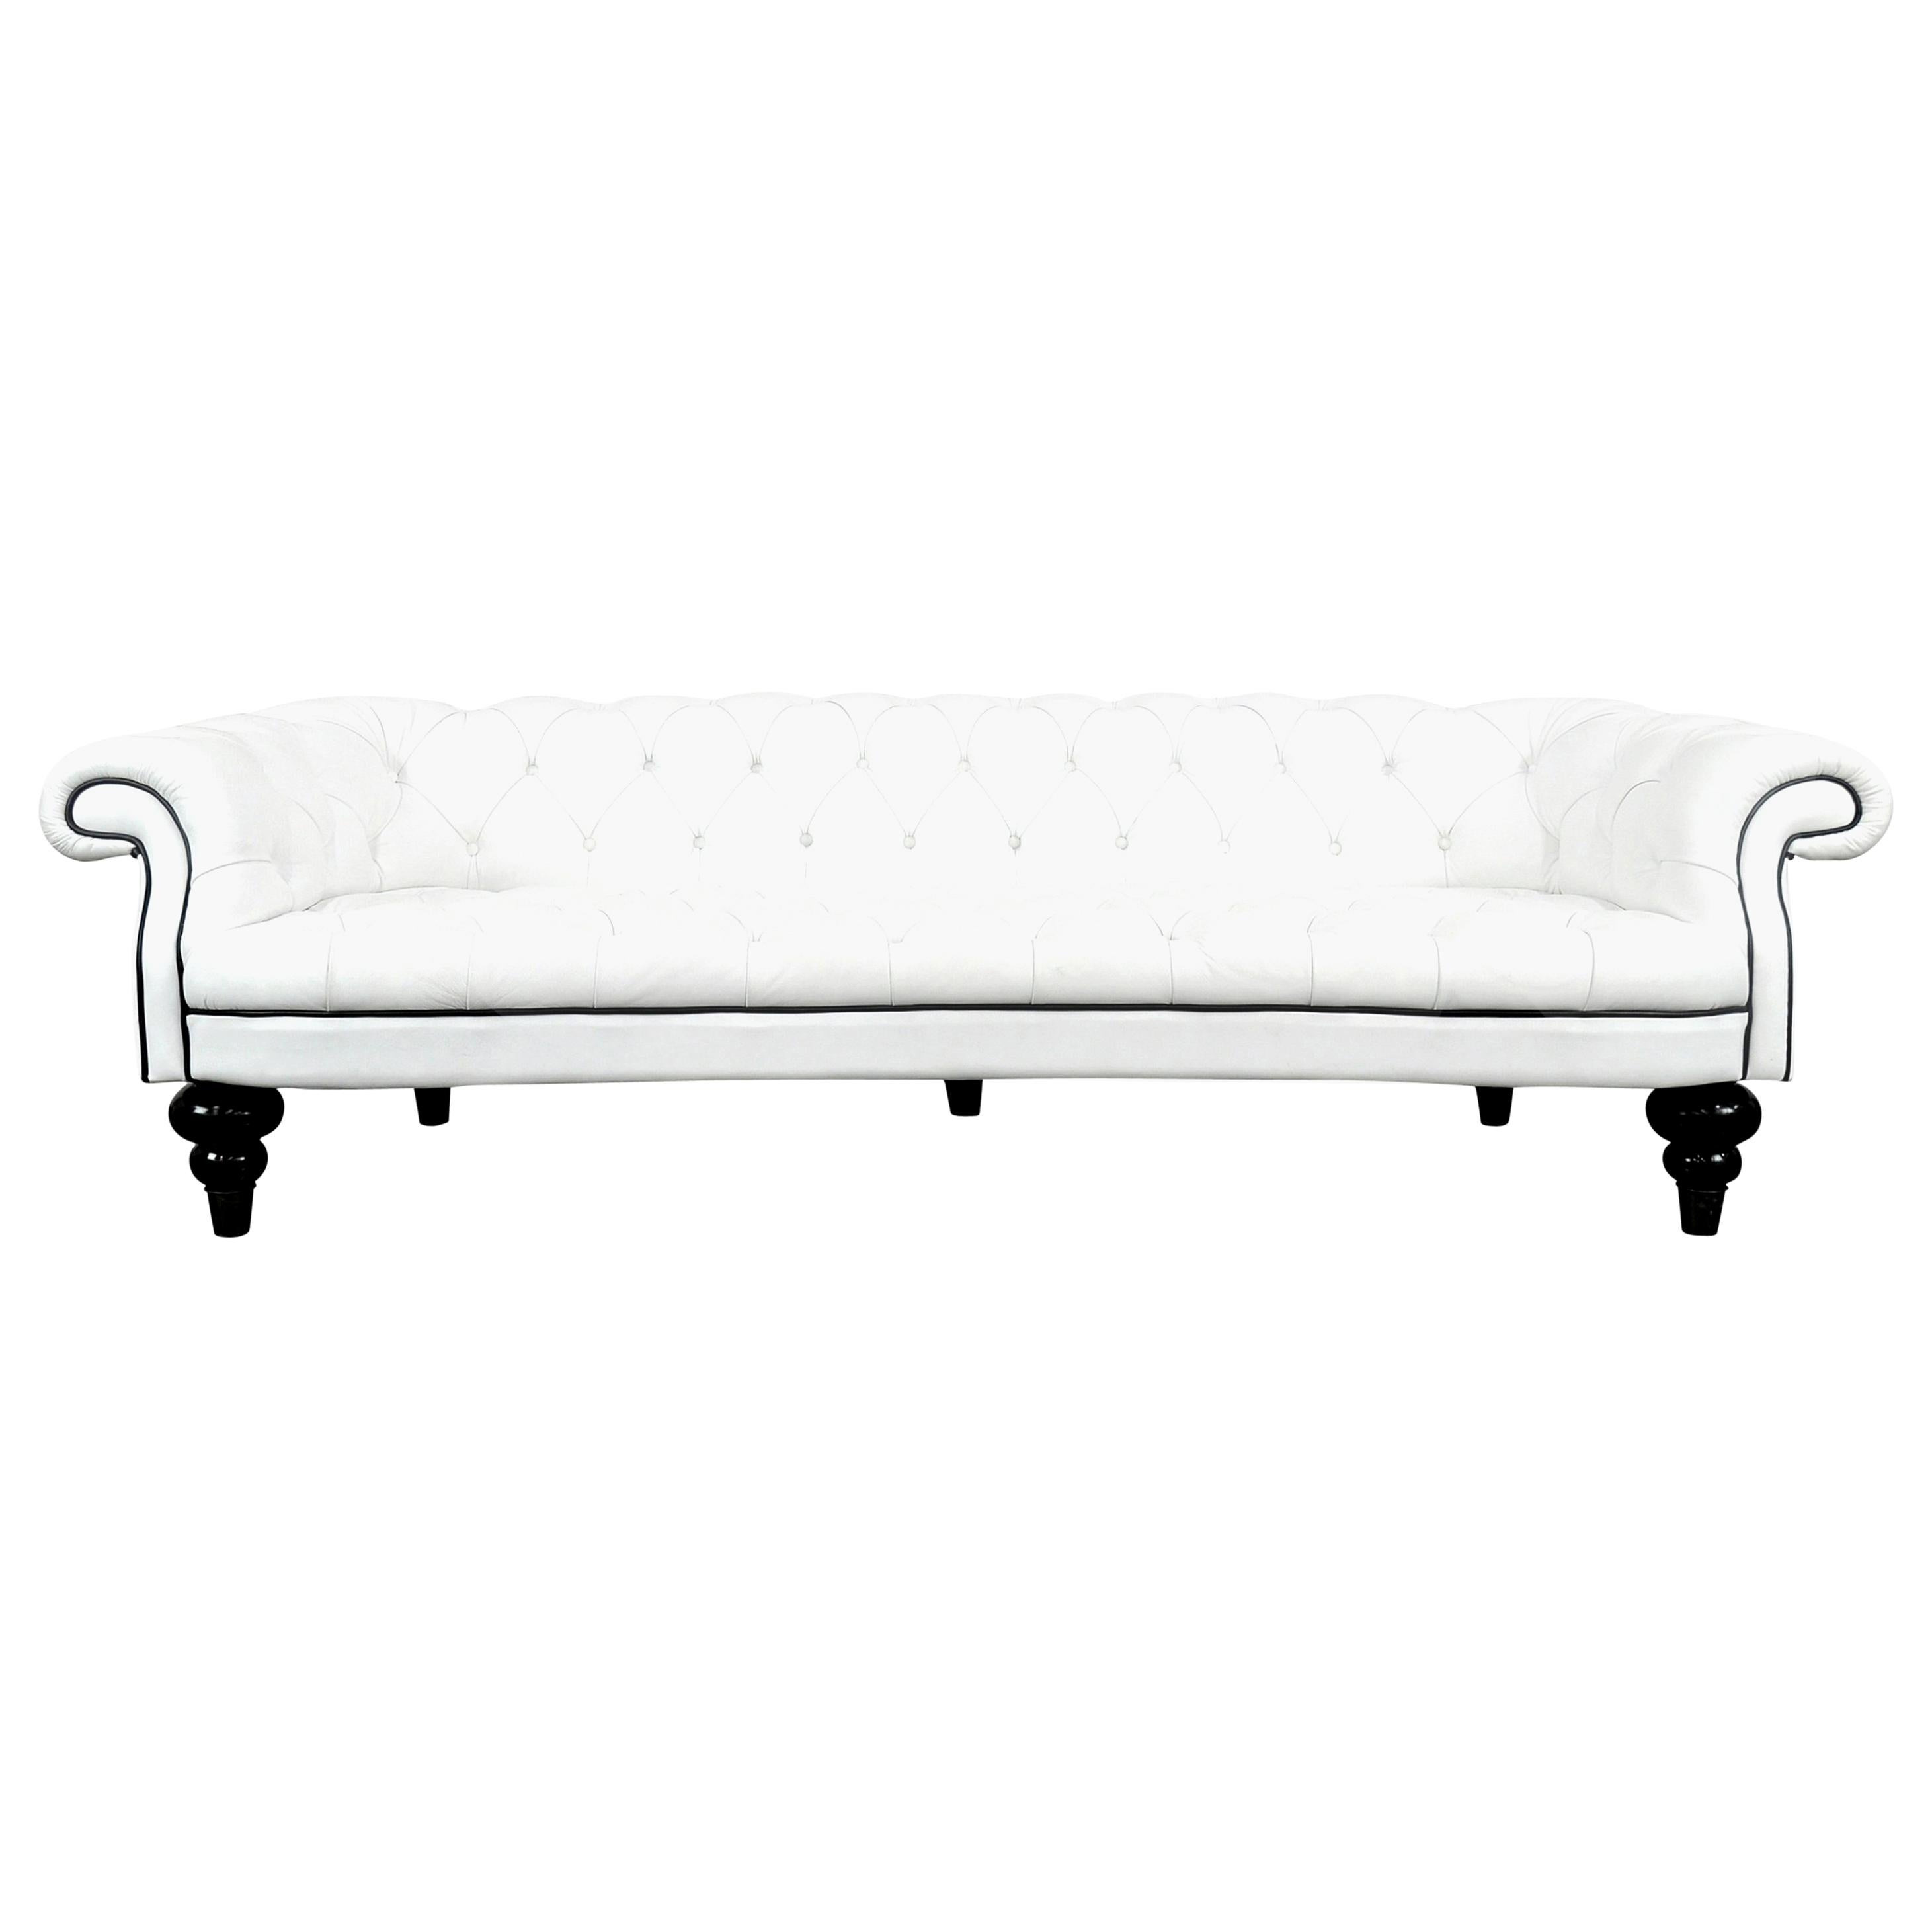 White and Black Leather Chesterfield Sofa